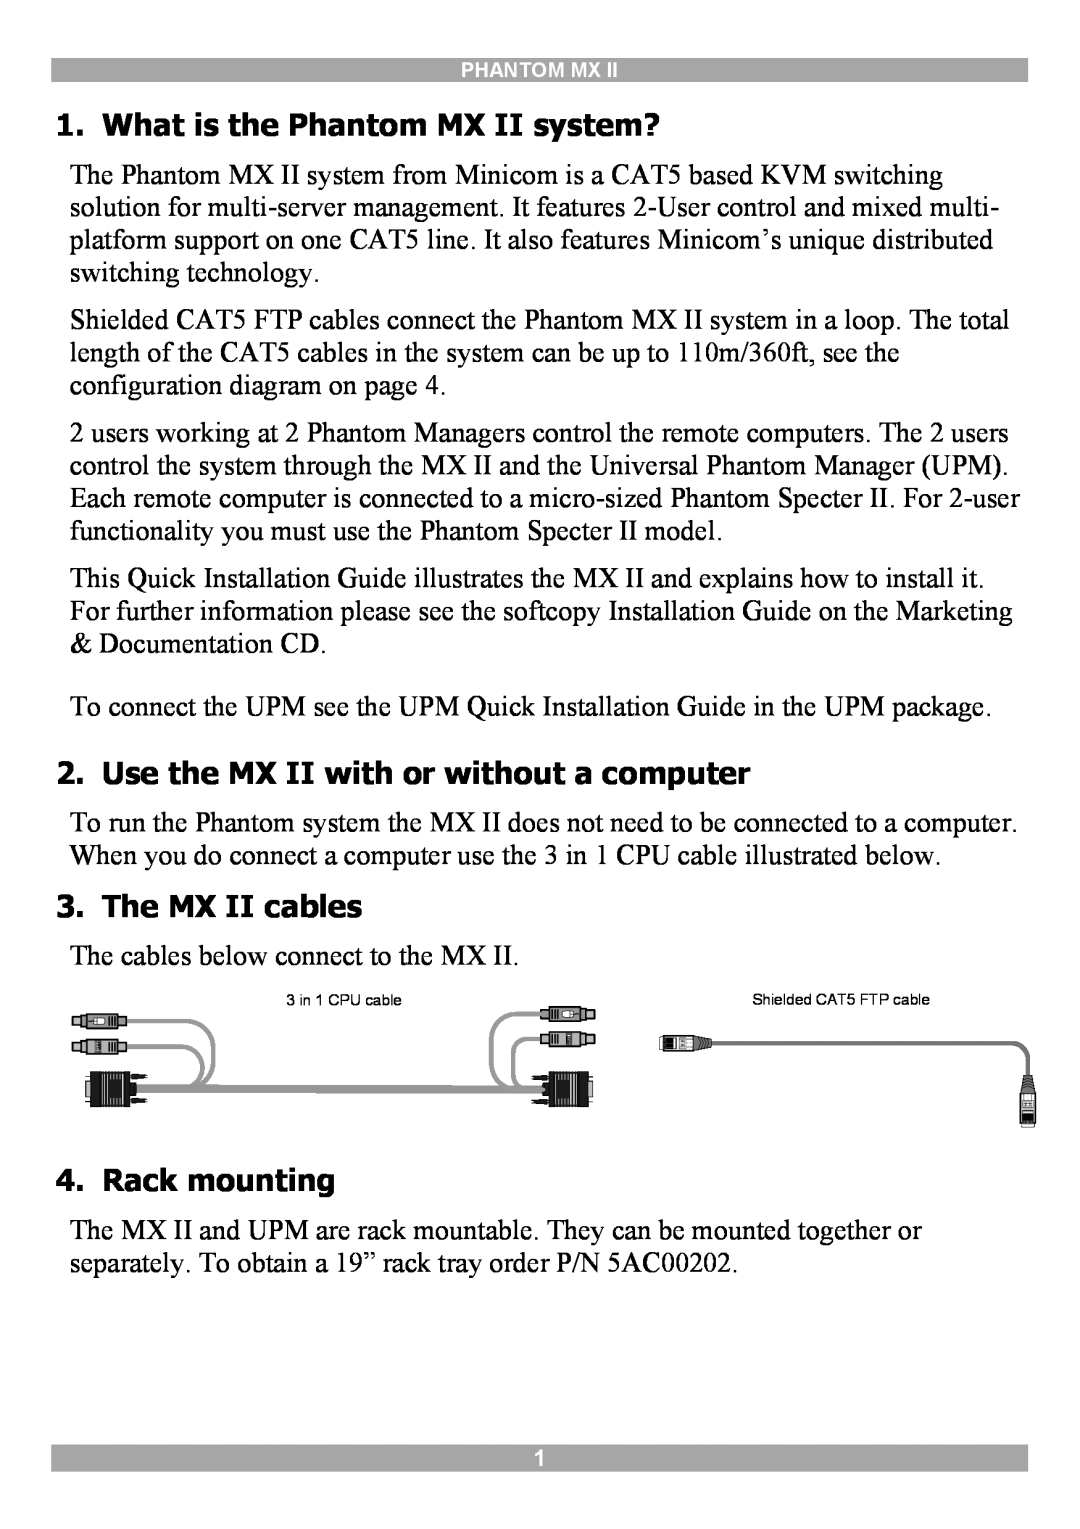 Minicom Advanced Systems What is the Phantom MX II system?, Use the MX II with or without a computer, The MX II cables 